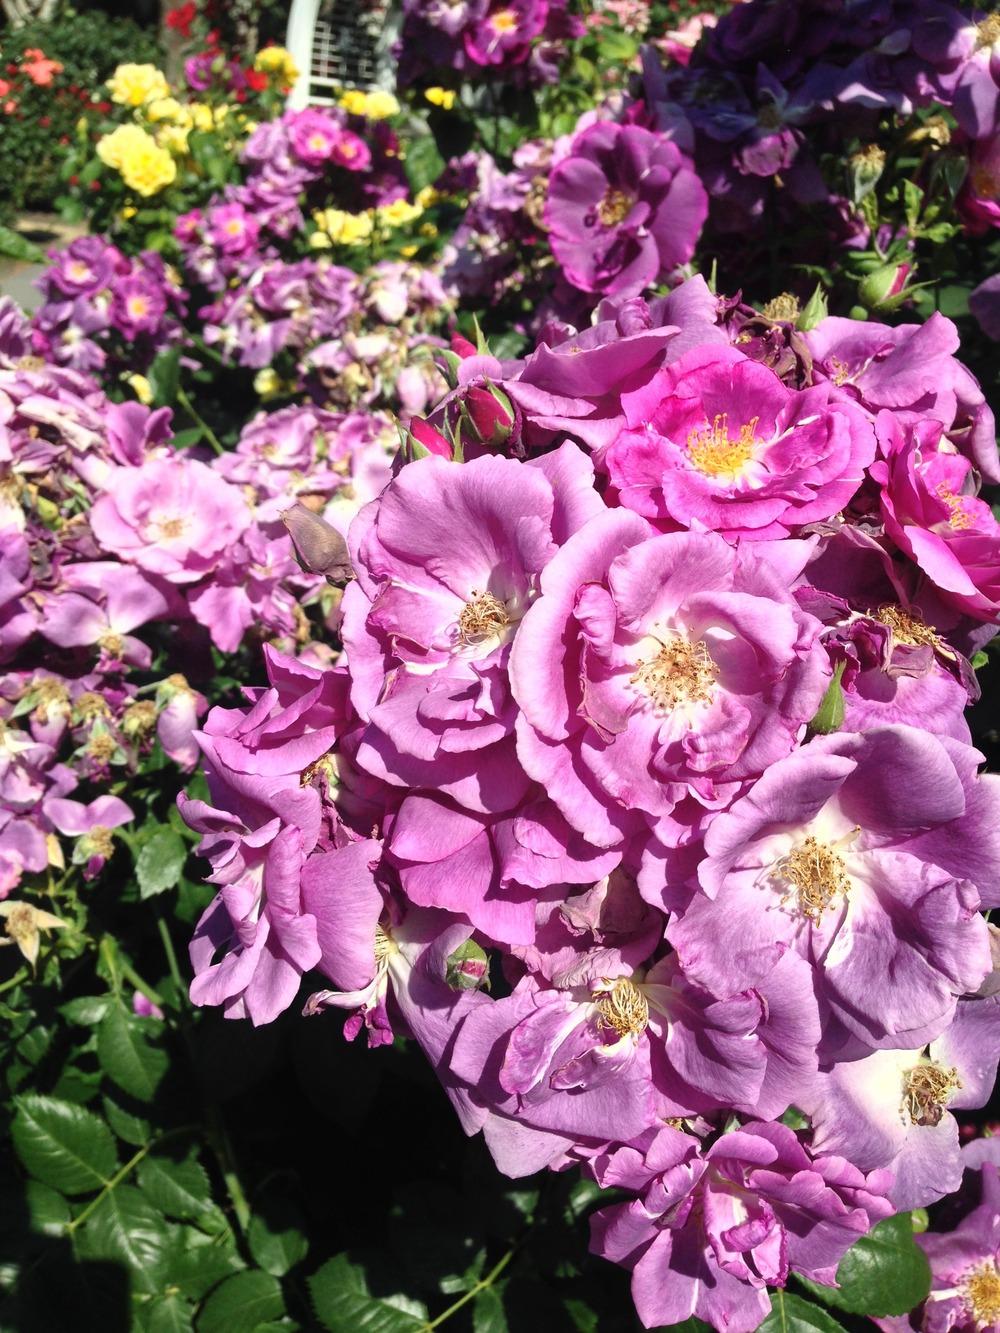 Photo of Rose (Rosa 'Rhapsody in Blue') uploaded by HamiltonSquare